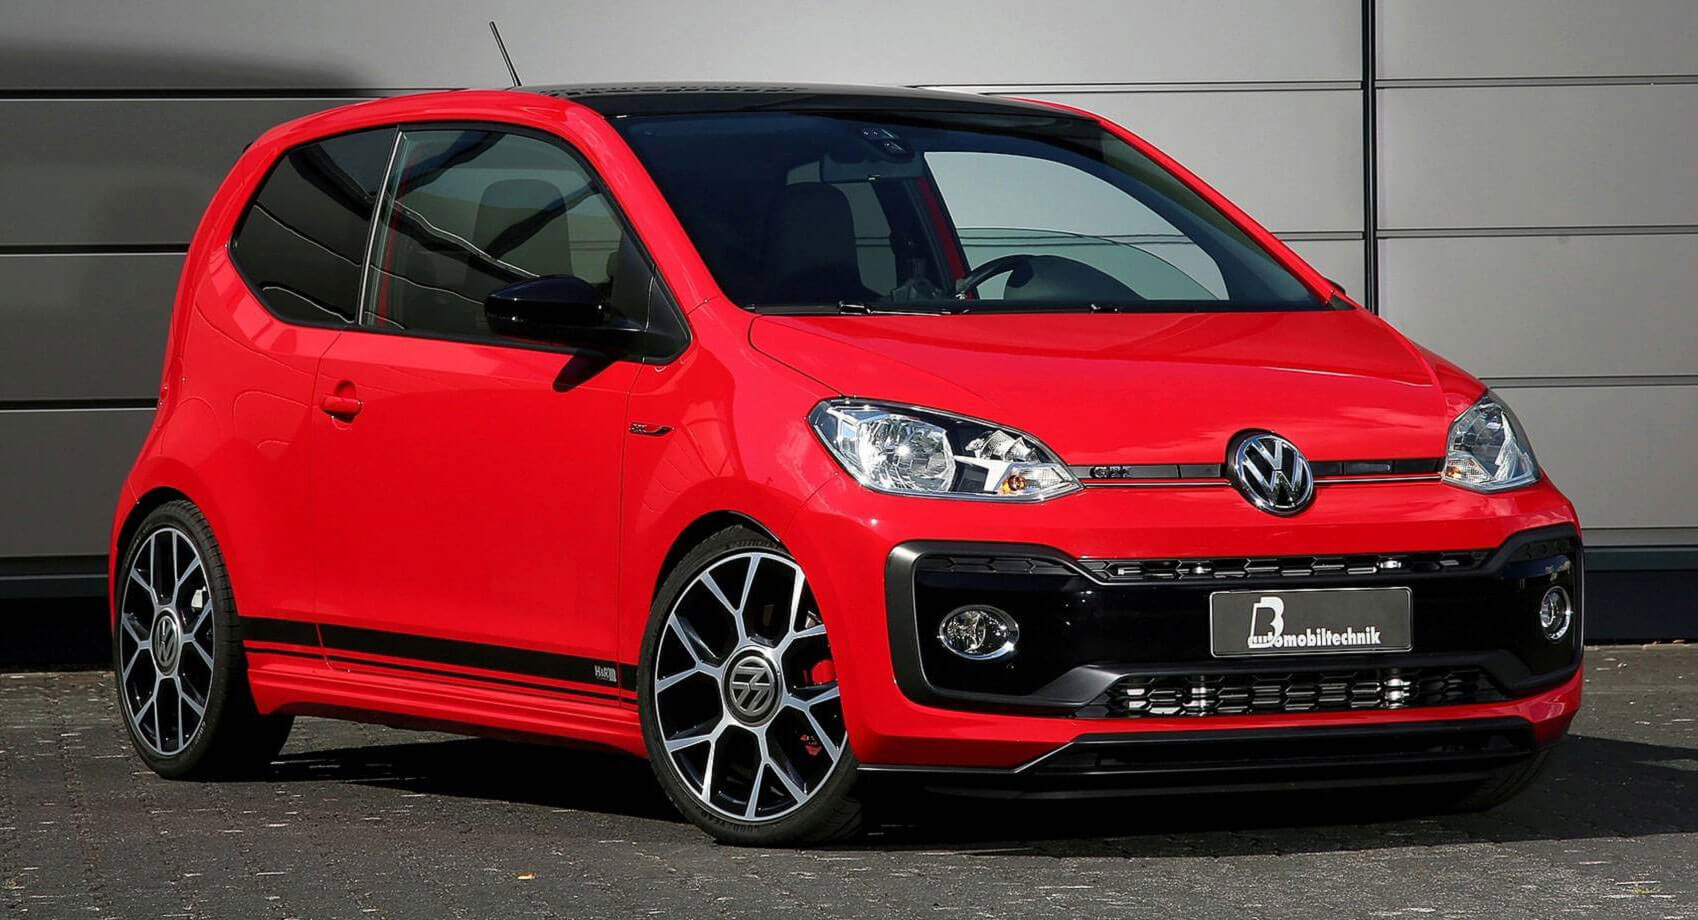 https://www.carscoops.com/wp-content/uploads/2018/08/a57cc3fb-vw-up-gti-tuning-0.jpg